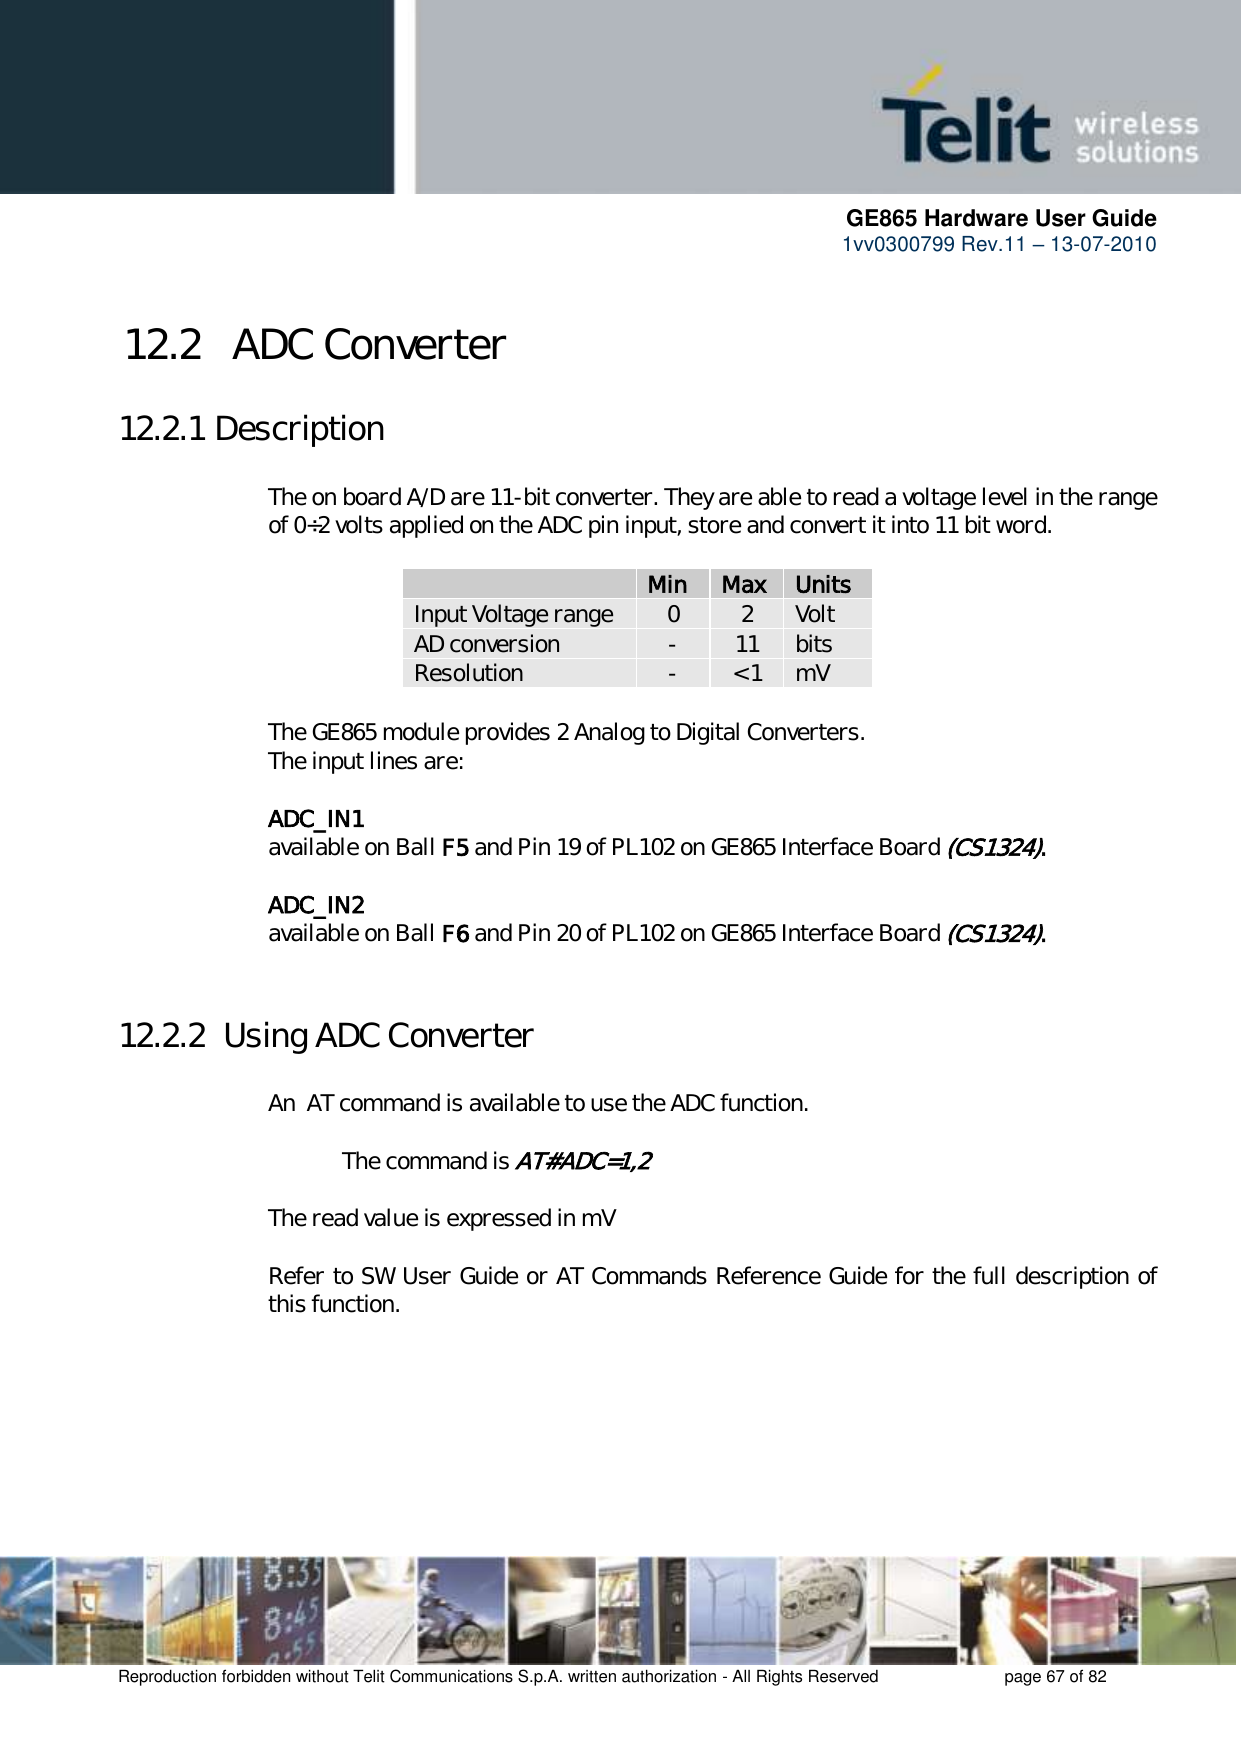      GE865 Hardware User Guide 1vv0300799 Rev.11 – 13-07-2010       Reproduction forbidden without Telit Communications S.p.A. written authorization - All Rights Reserved    page 67 of 82  12.2   ADC Converter 12.2.1 Description  The on board A/D are 11-bit converter. They are able to read a voltage level in the range of 0÷2 volts applied on the ADC pin input, store and convert it into 11 bit word.    Min Max Units Input Voltage range 0 2 Volt AD conversion - 11 bits Resolution - &lt; 1 mV  The GE865 module provides 2 Analog to Digital Converters.  The input lines are:  ADC_IN1   available on Ball F5 and Pin 19 of PL102 on GE865 Interface Board (CS1324).  ADC_IN2   available on Ball F6 and Pin 20 of PL102 on GE865 Interface Board (CS1324).  12.2.2  Using ADC Converter  An  AT command is available to use the ADC function.  The command is AT#ADC=1,2  The read value is expressed in mV  Refer to SW User Guide or AT Commands Reference Guide for the full description of this function.  